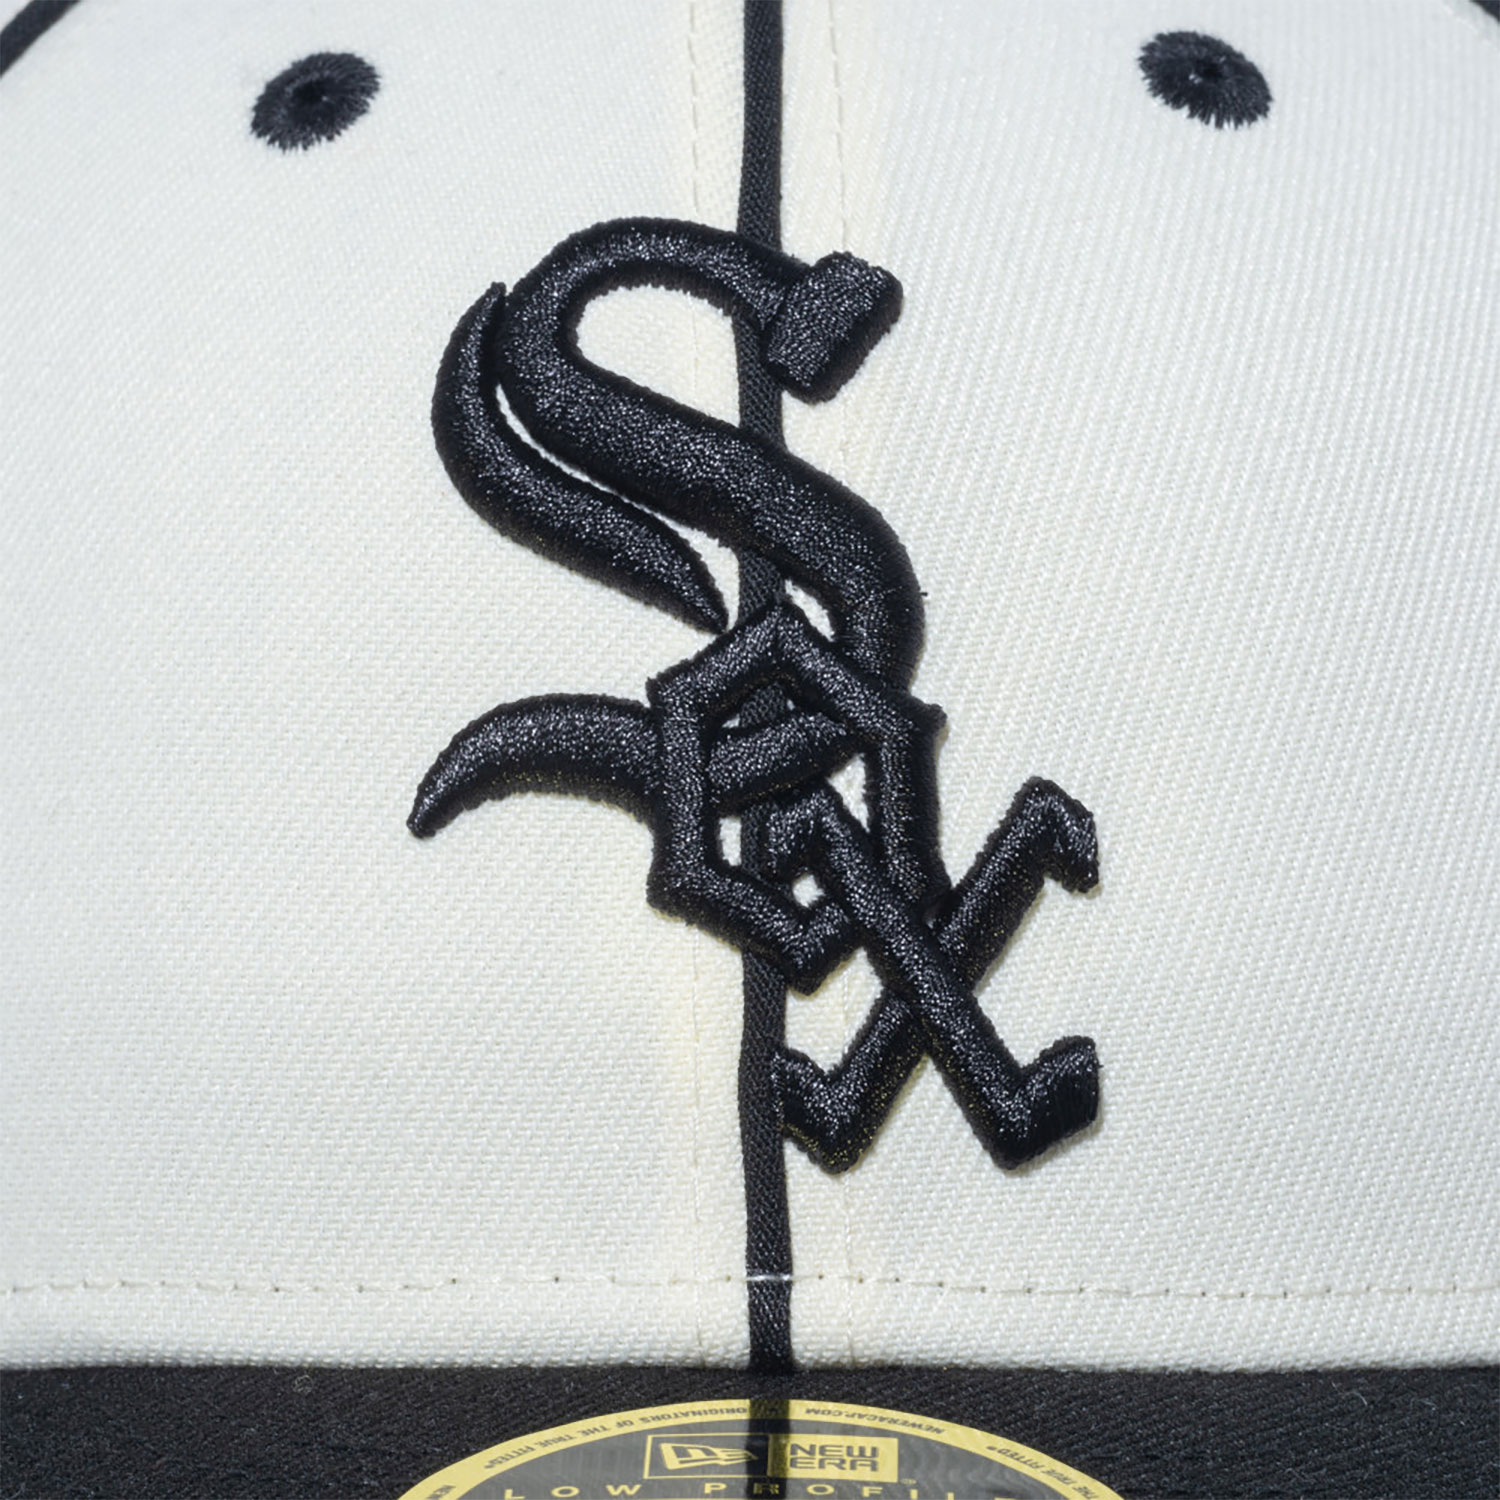 Chicago White Sox Japan MLB Piping White Low Profile 59FIFTY Fitted Cap